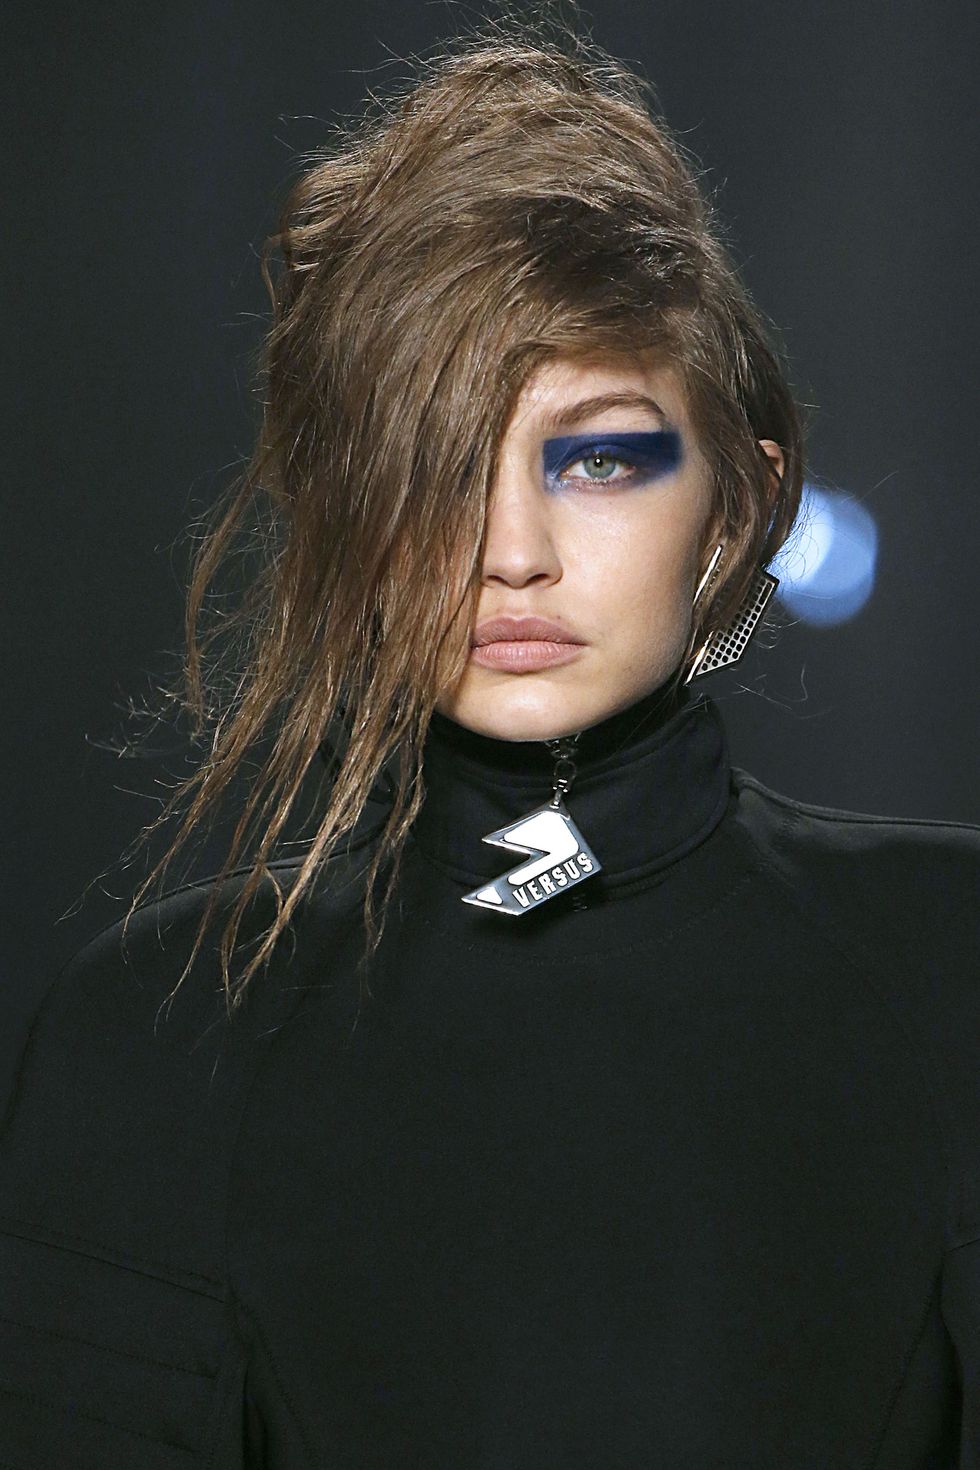 LONDON, ENGLAND - FEBRUARY 18: Gigi Hadid walks the runway at the VERSUS designed by Donatella Versace Ready to Wear Fall Winter 2017-2018 fashion show during the London Fashion Week February 2017 collections on February 18, 2017 in London, England. (Photo by Victor VIRGILE/Gamma-Rapho via Getty Images)